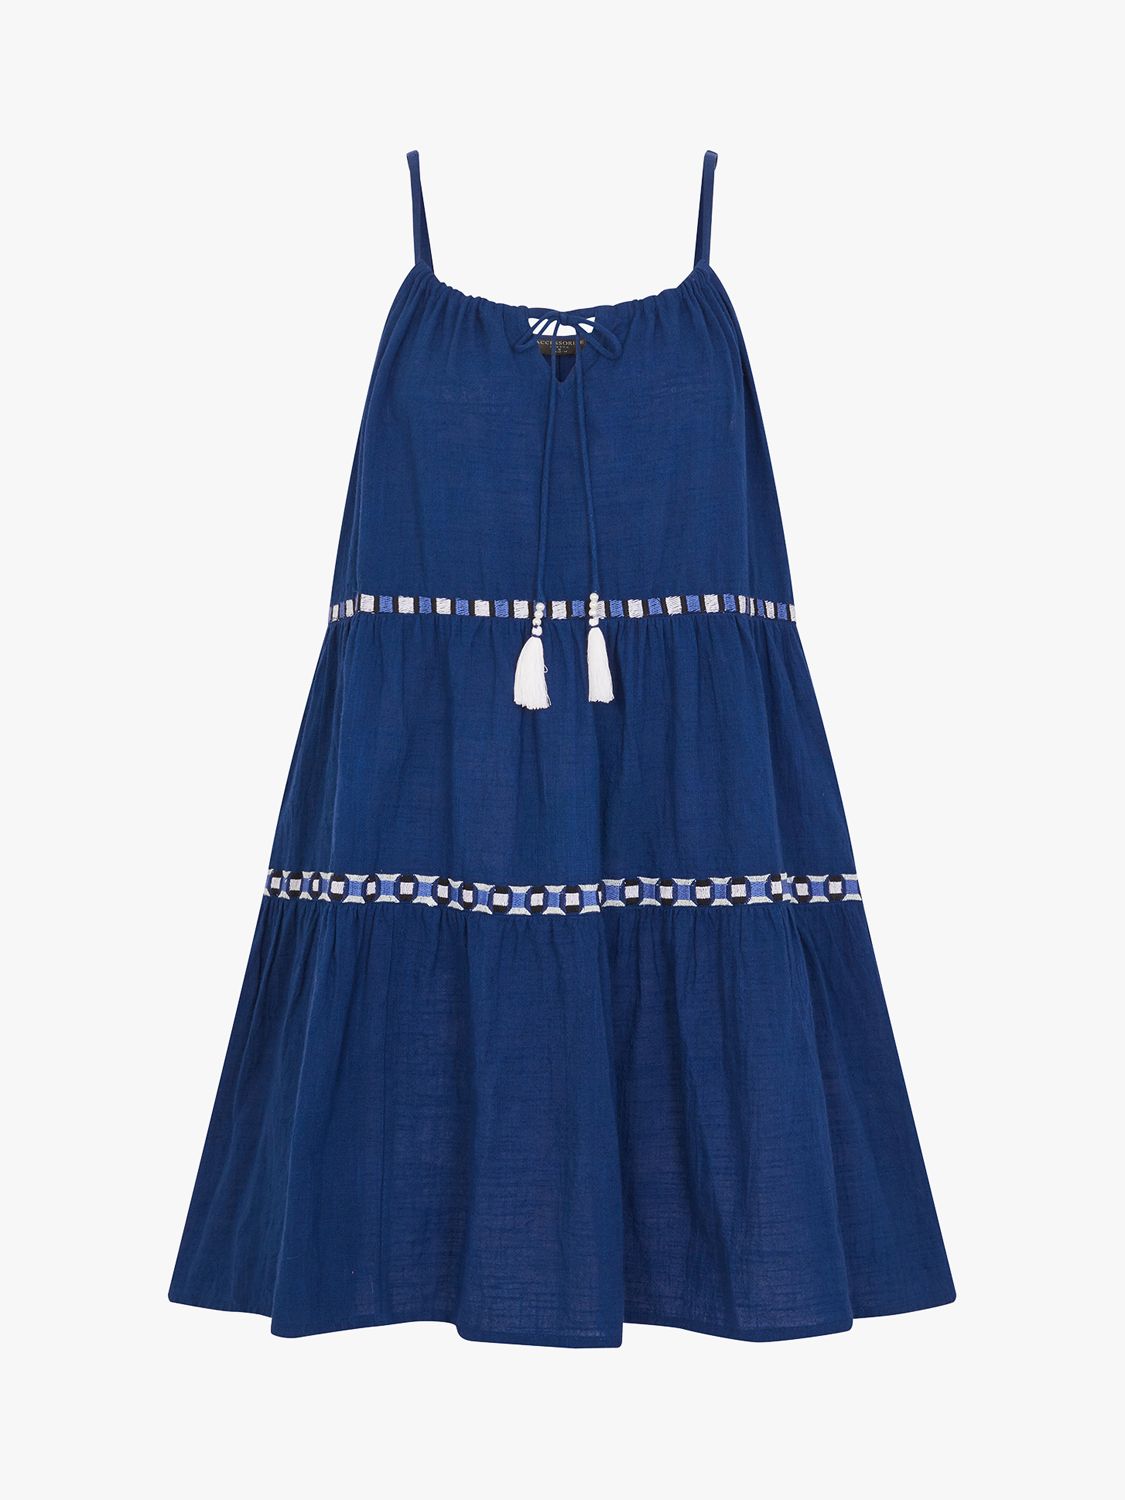 Accessorize Geo Tiered Beach Dress, Blue at John Lewis & Partners